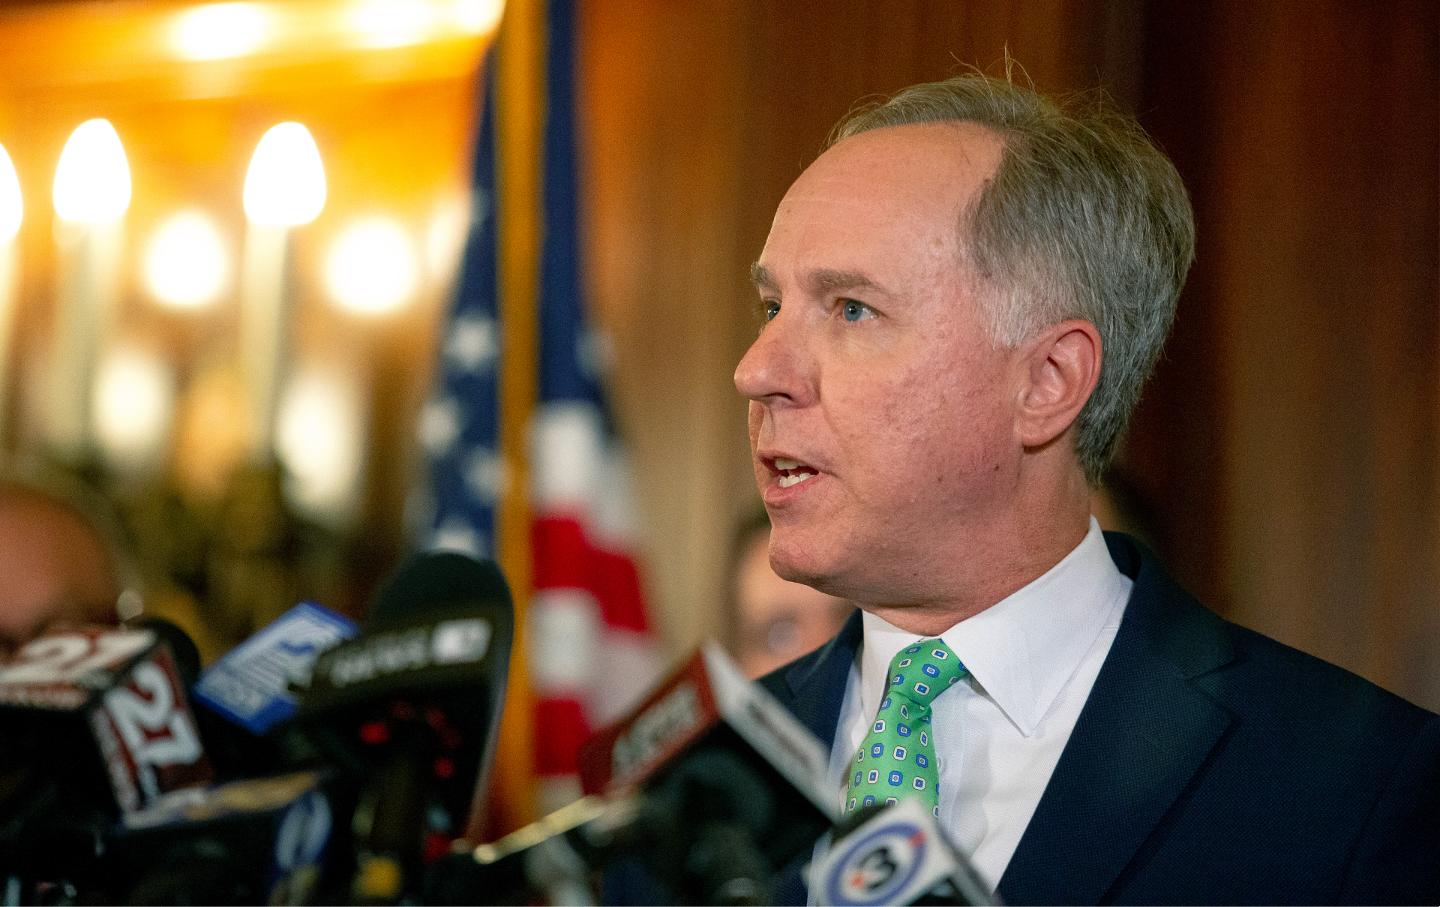 Speaker of the Wisconsin Assembly Robin Vos speaks during a news conference at the Wisconsin Capitol in Madison, Wis., Feb. 15, 2023.